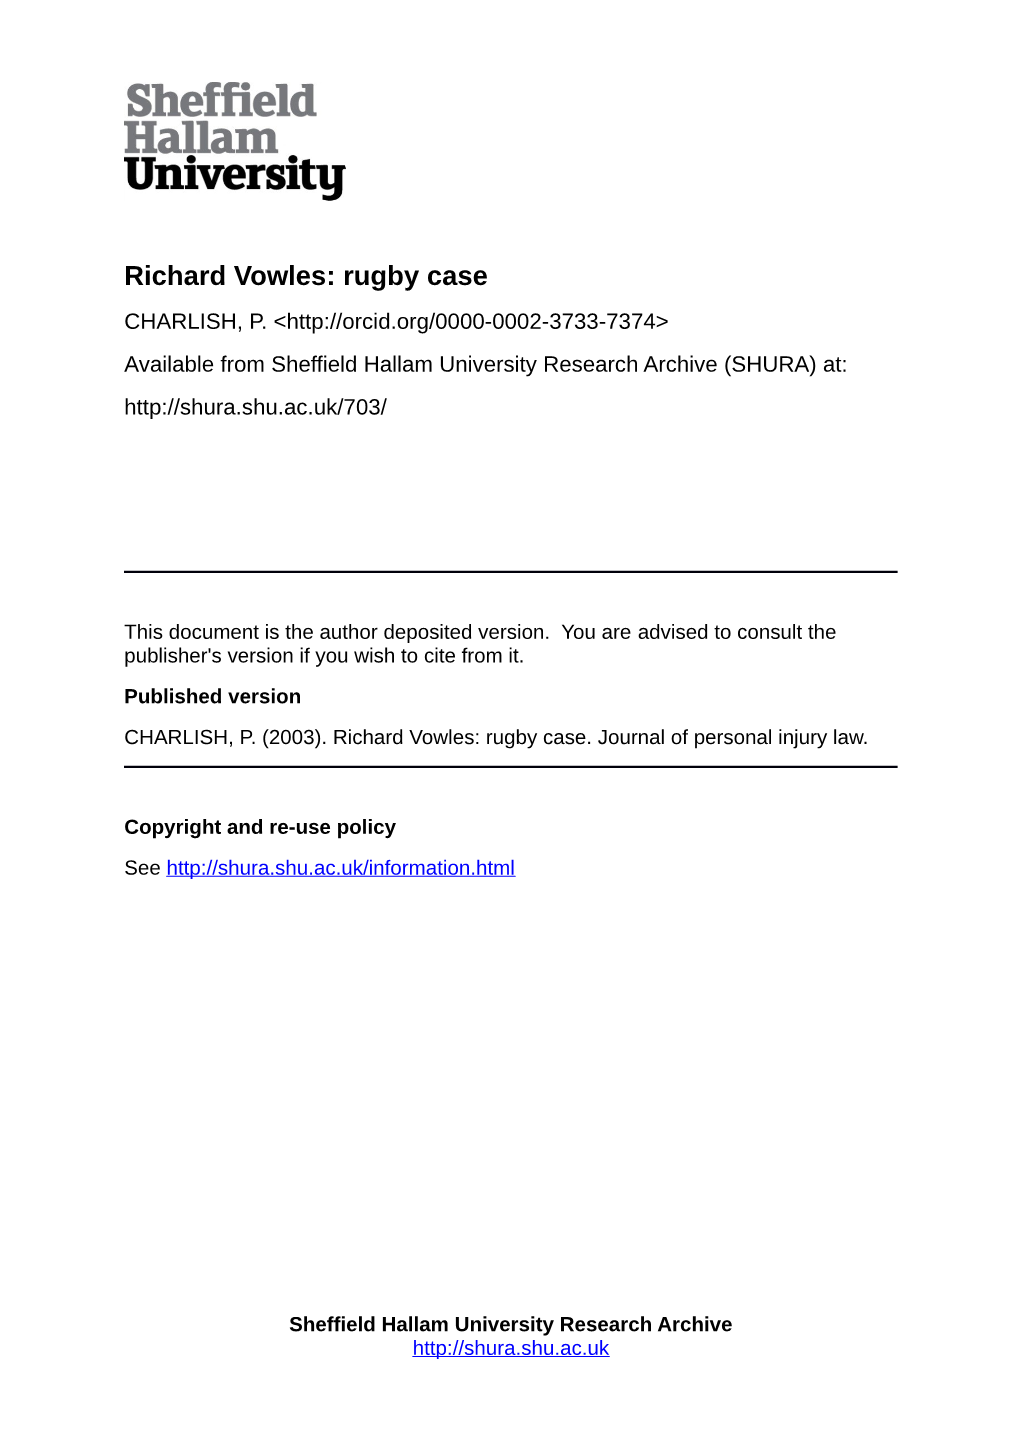 Richard Vowles: Rugby Case CHARLISH, P